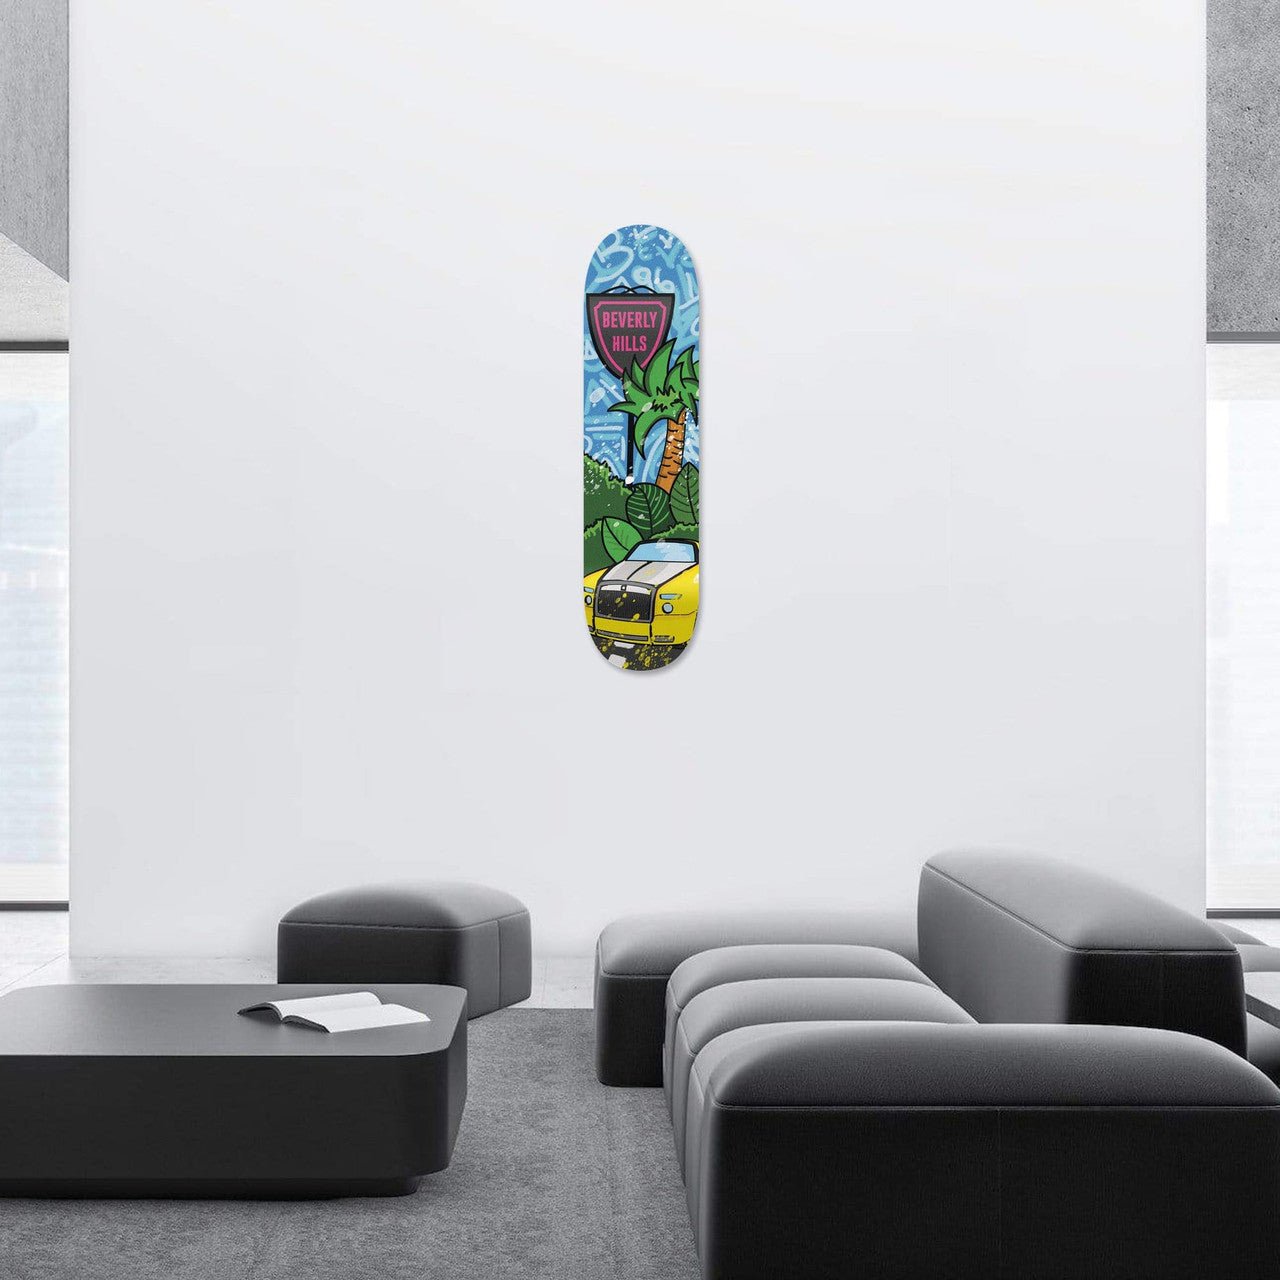 Bundle: "Beverly Hills: Palm Mansion & City Hall & Double R" - Skateboard - The Art Lab Acrylic Glass Art - Skateboards, Surfboards & Glass Prints Wall Decor for your Home.